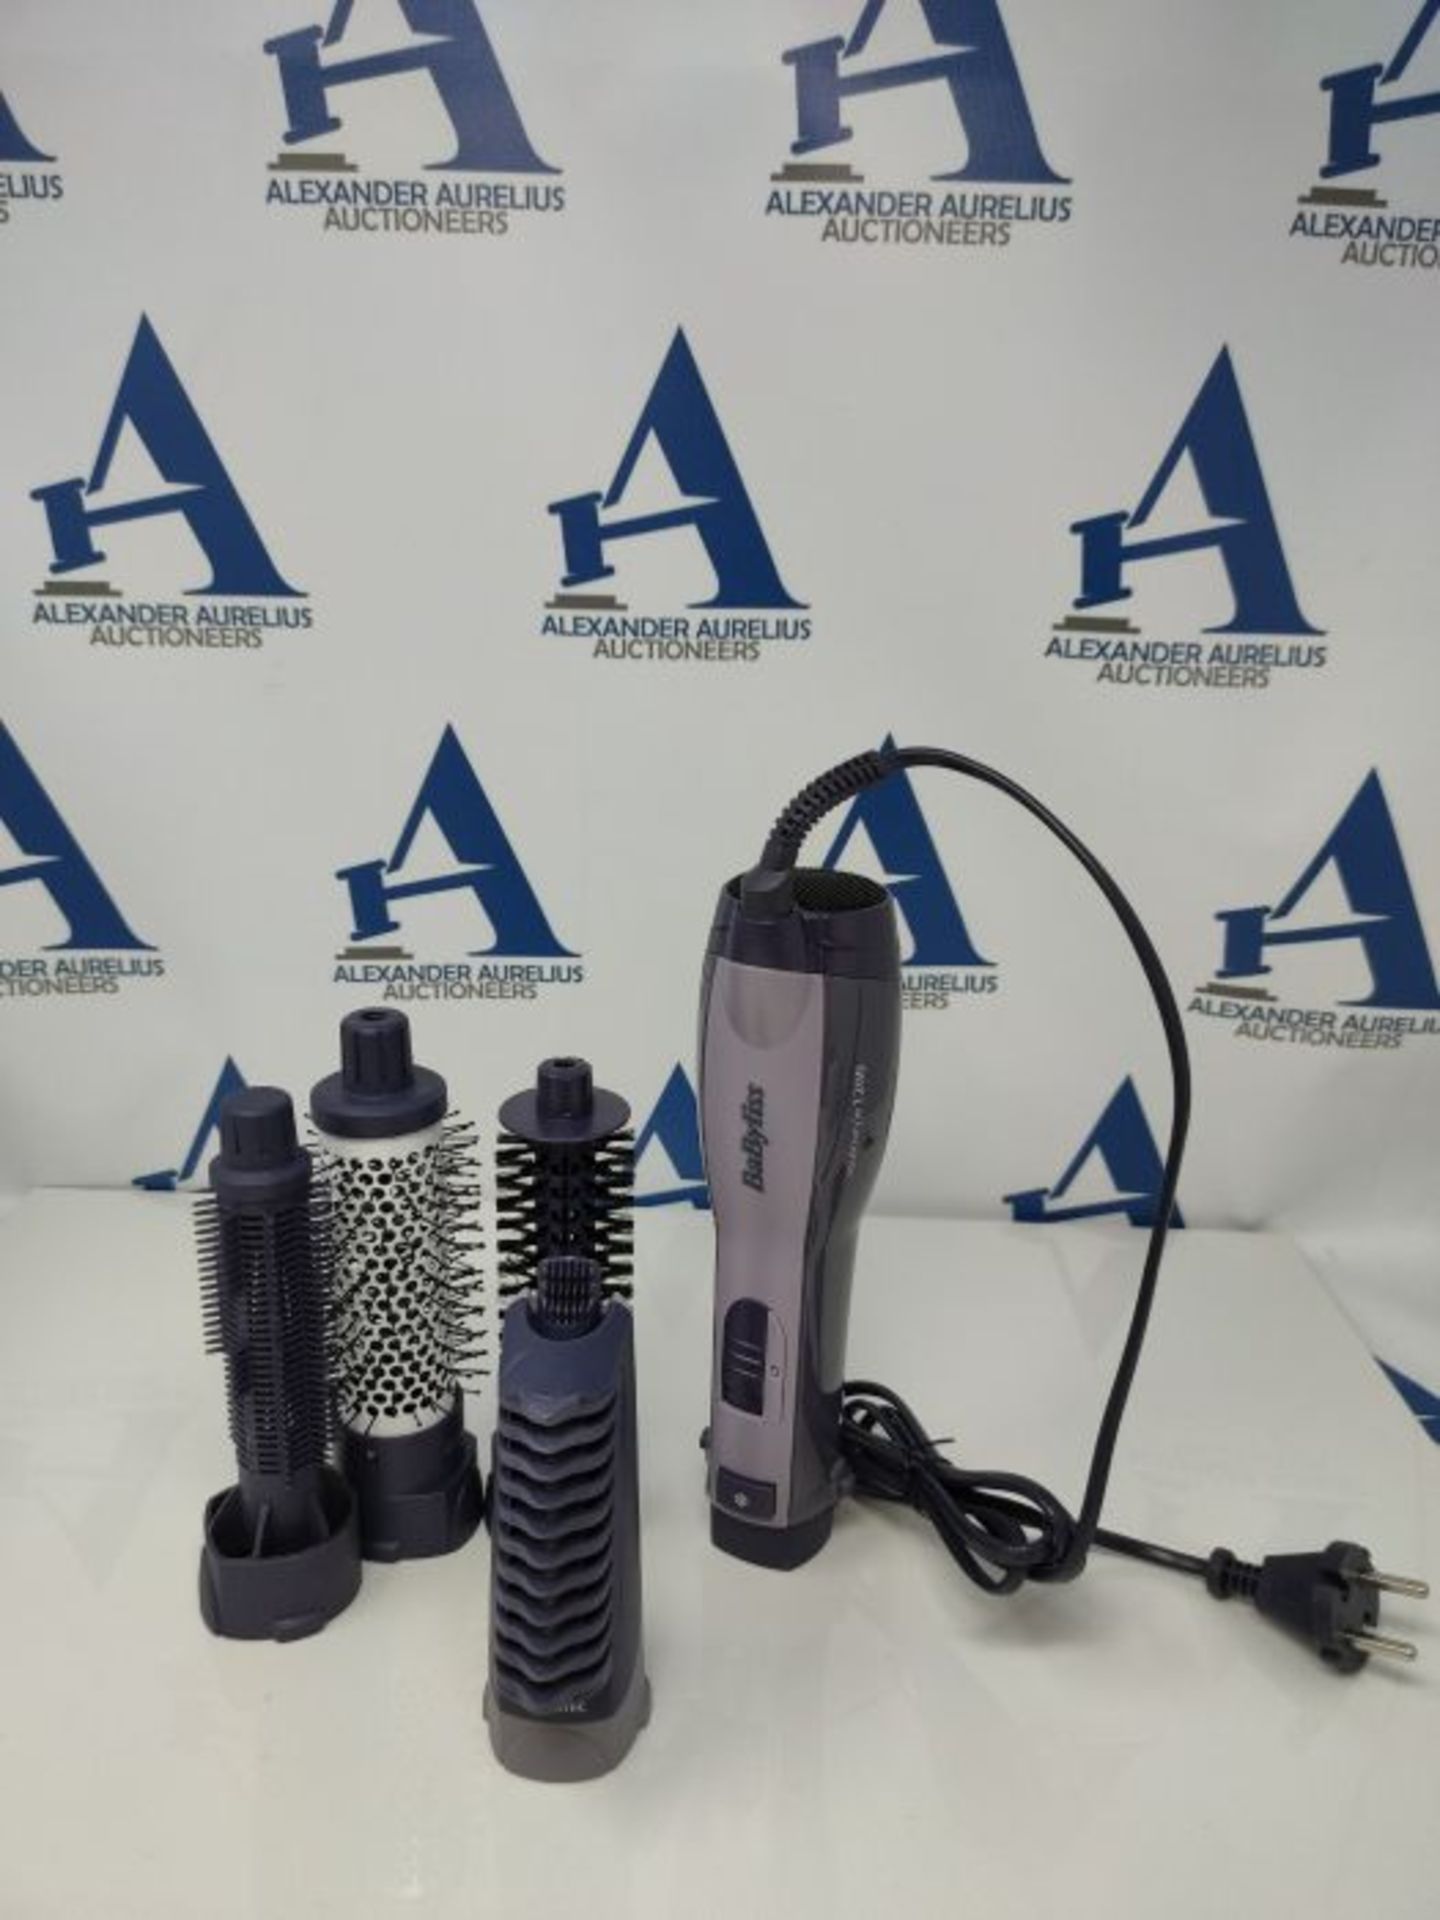 BaByliss AS121E Multistyle Hot Air Brush 1200 Watt Ionic 4 Attachments Ceramic - Image 3 of 3